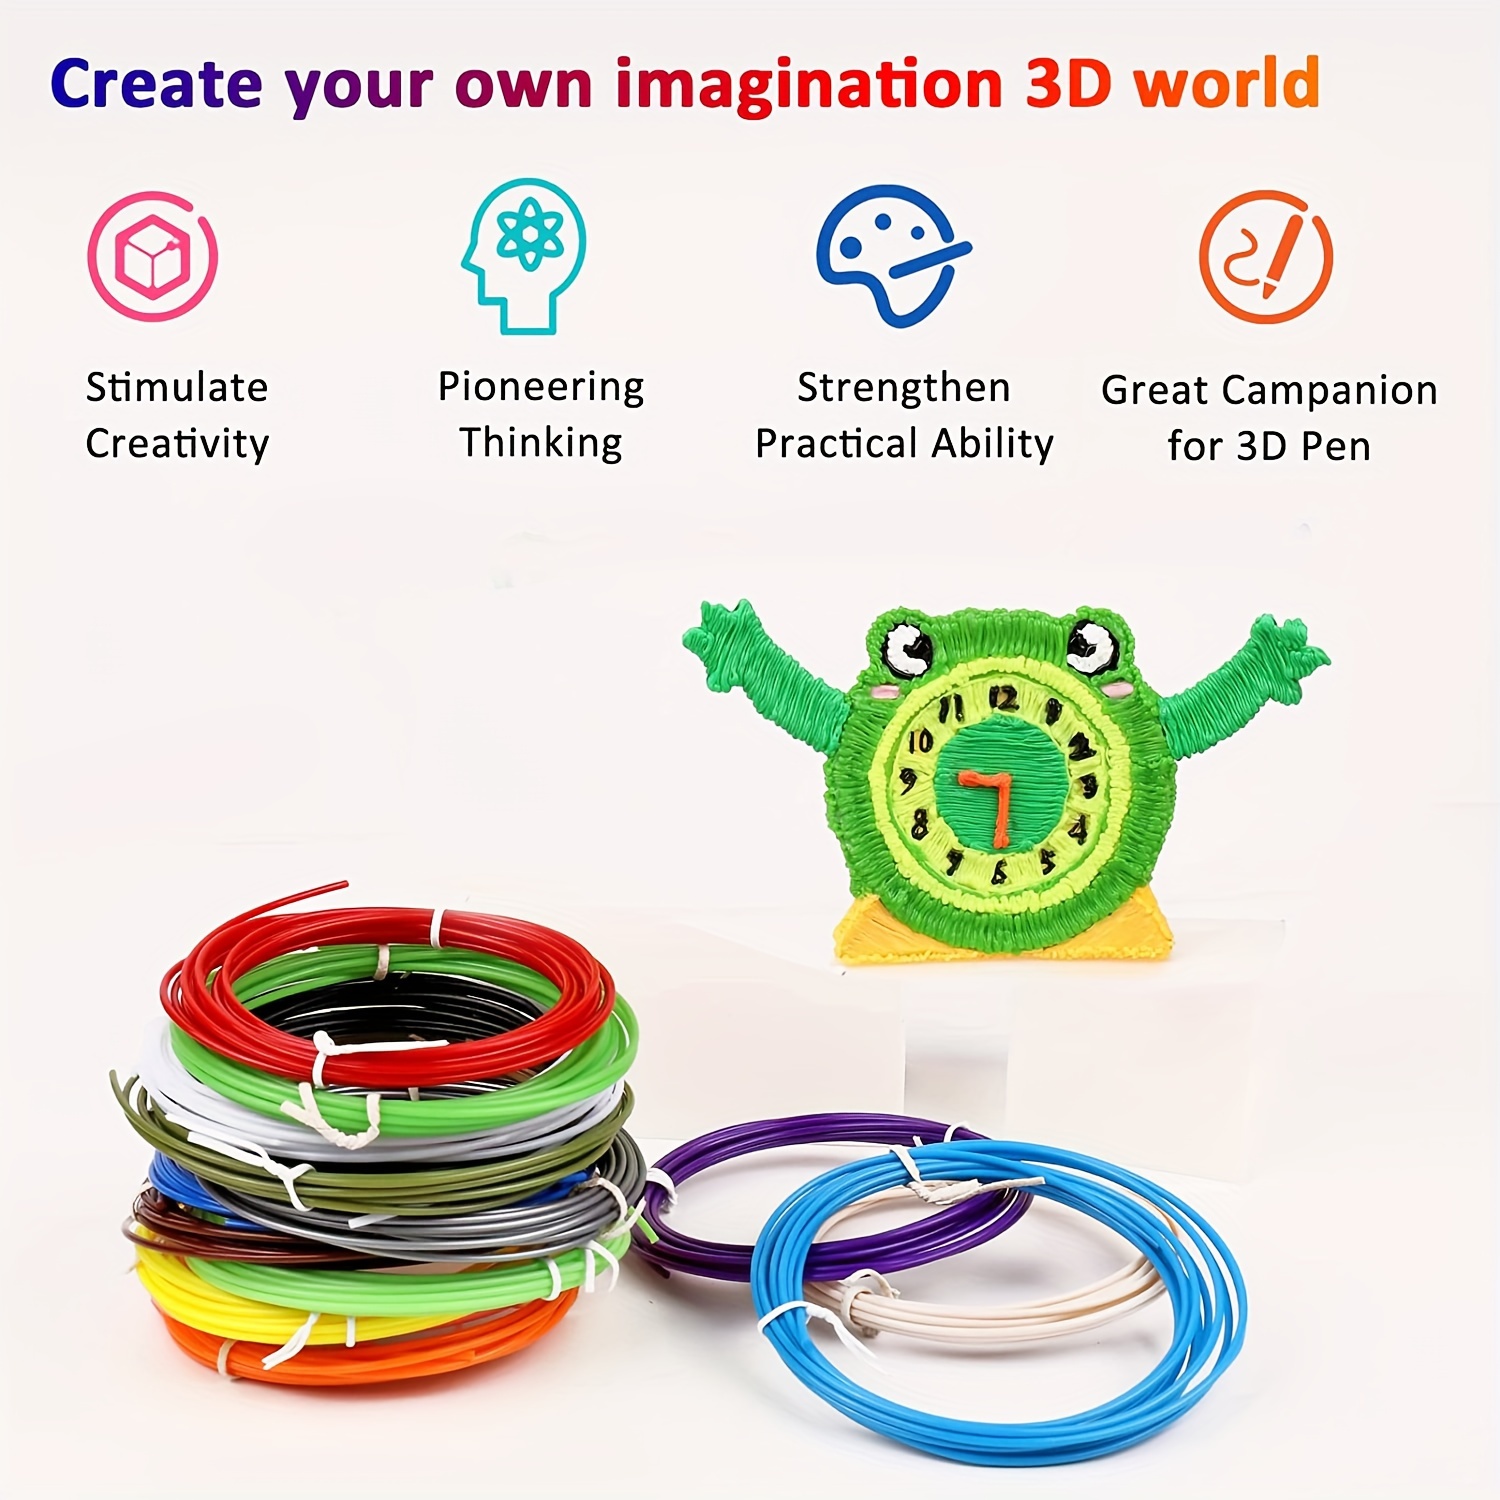 Buy 3D printing PCL filament in New Zealand